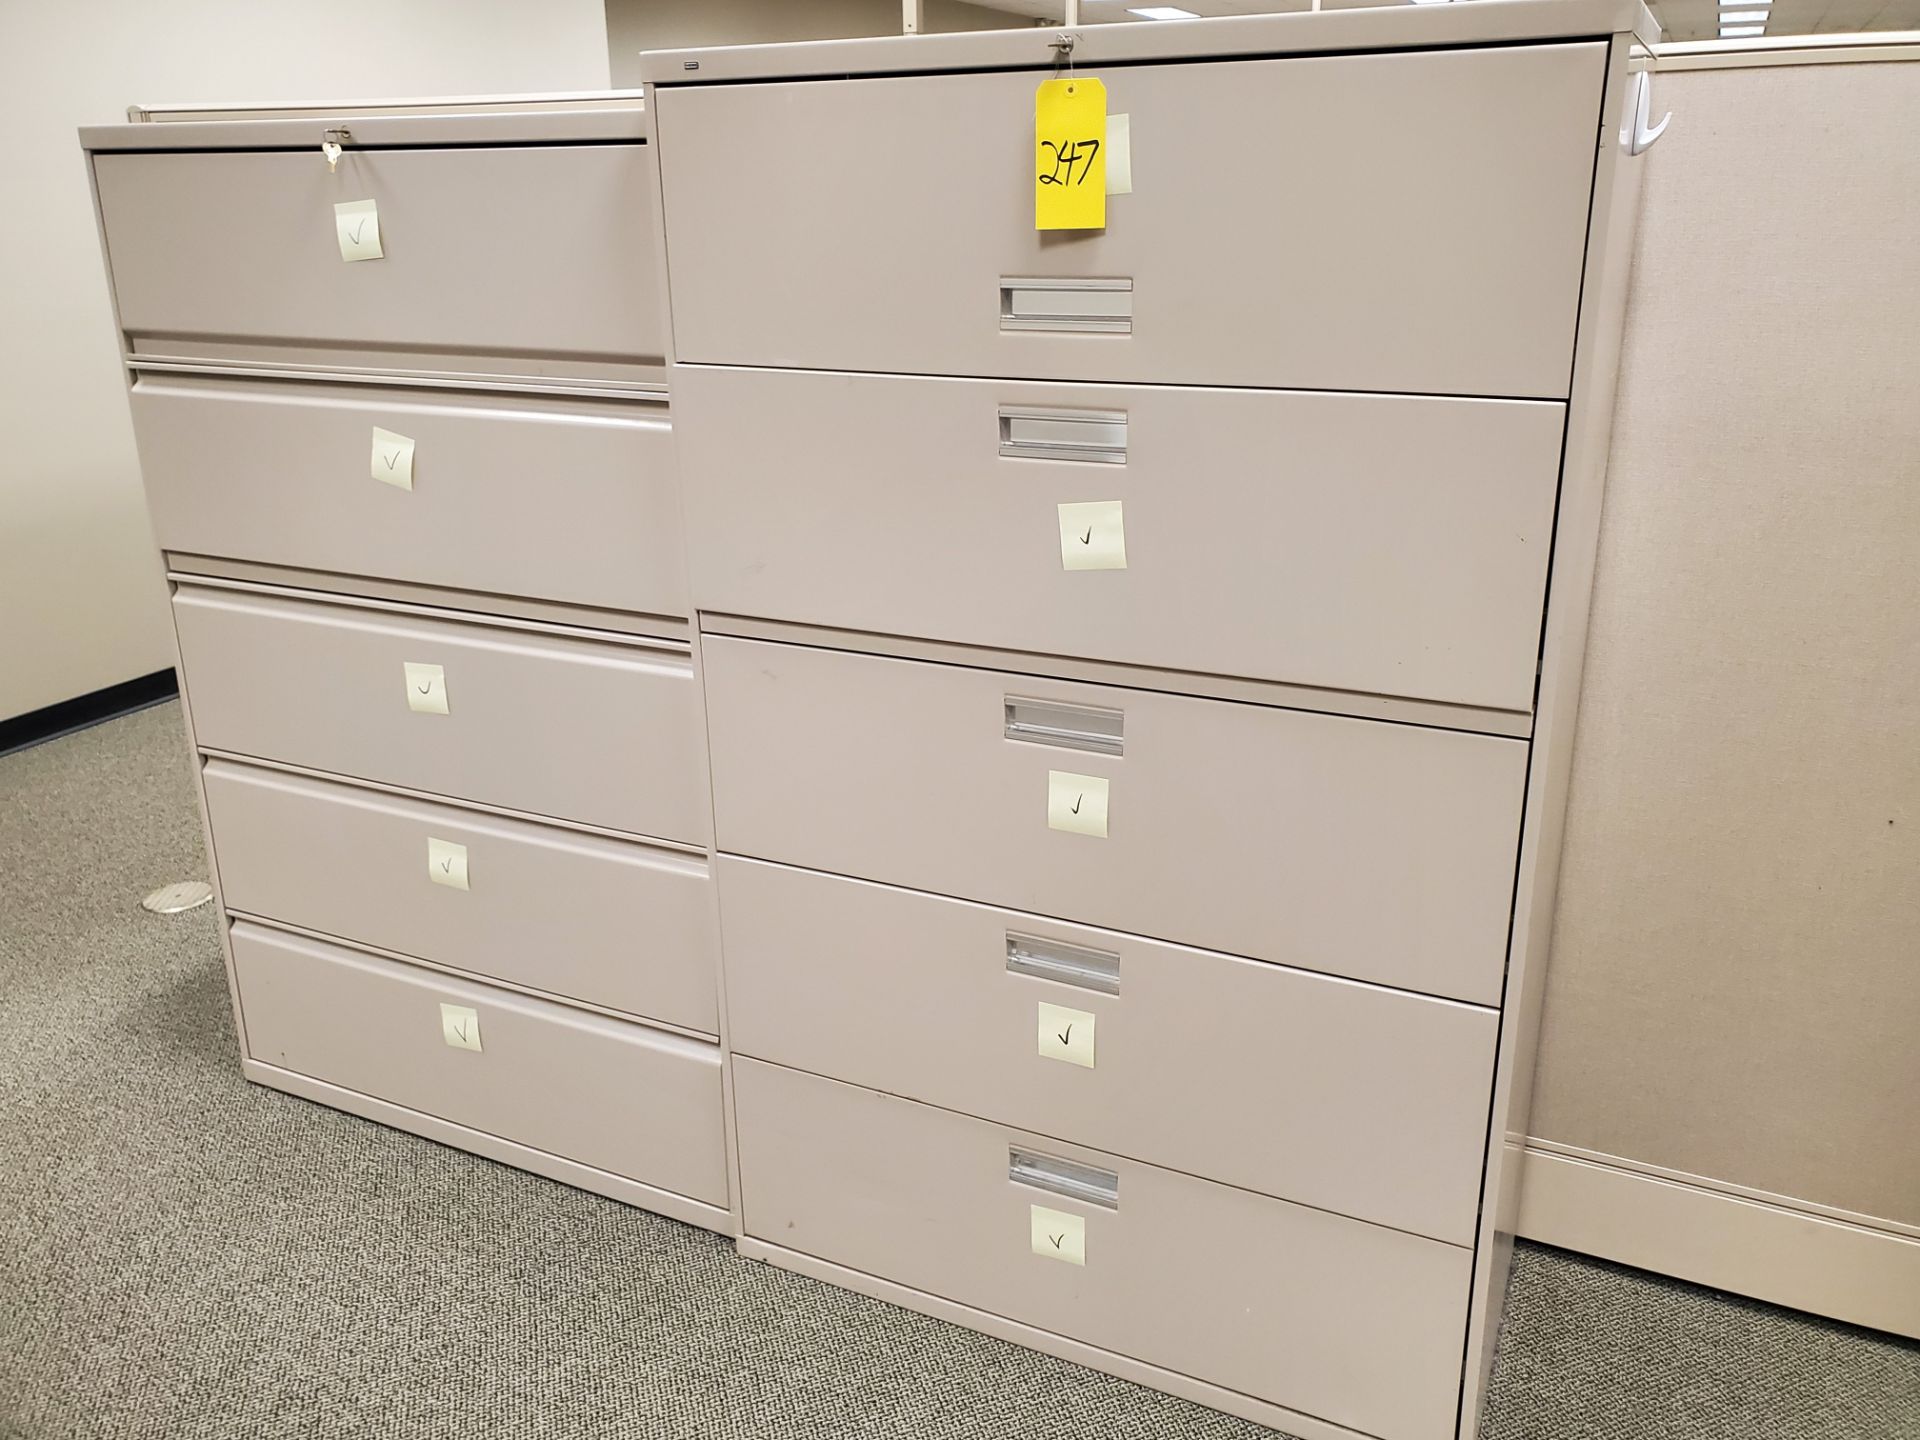 (2) Lateral File Cabinets